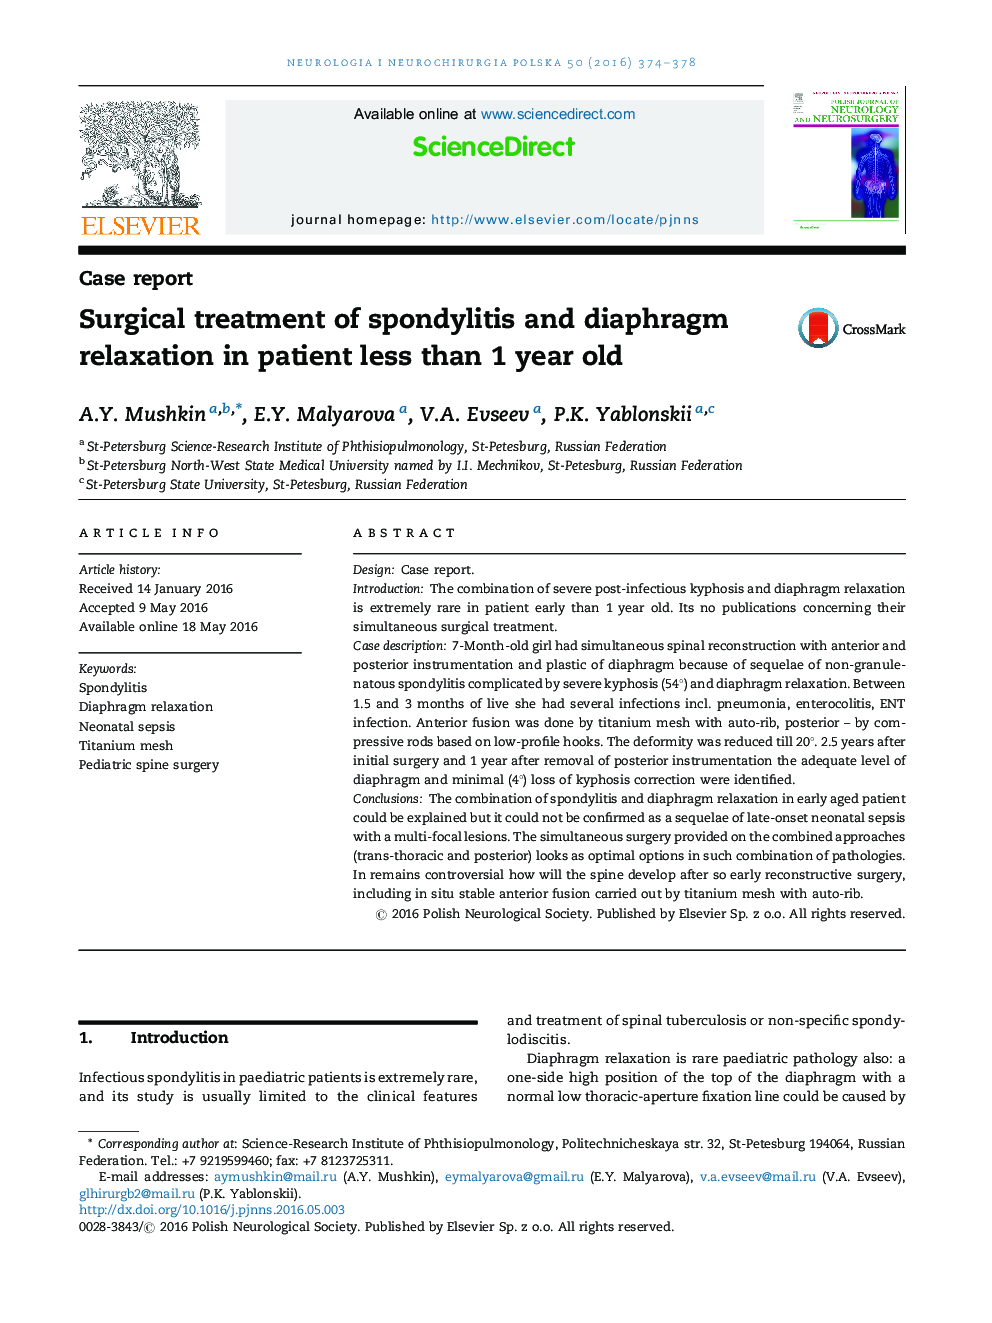 Surgical treatment of spondylitis and diaphragm relaxation in patient less than 1 year old